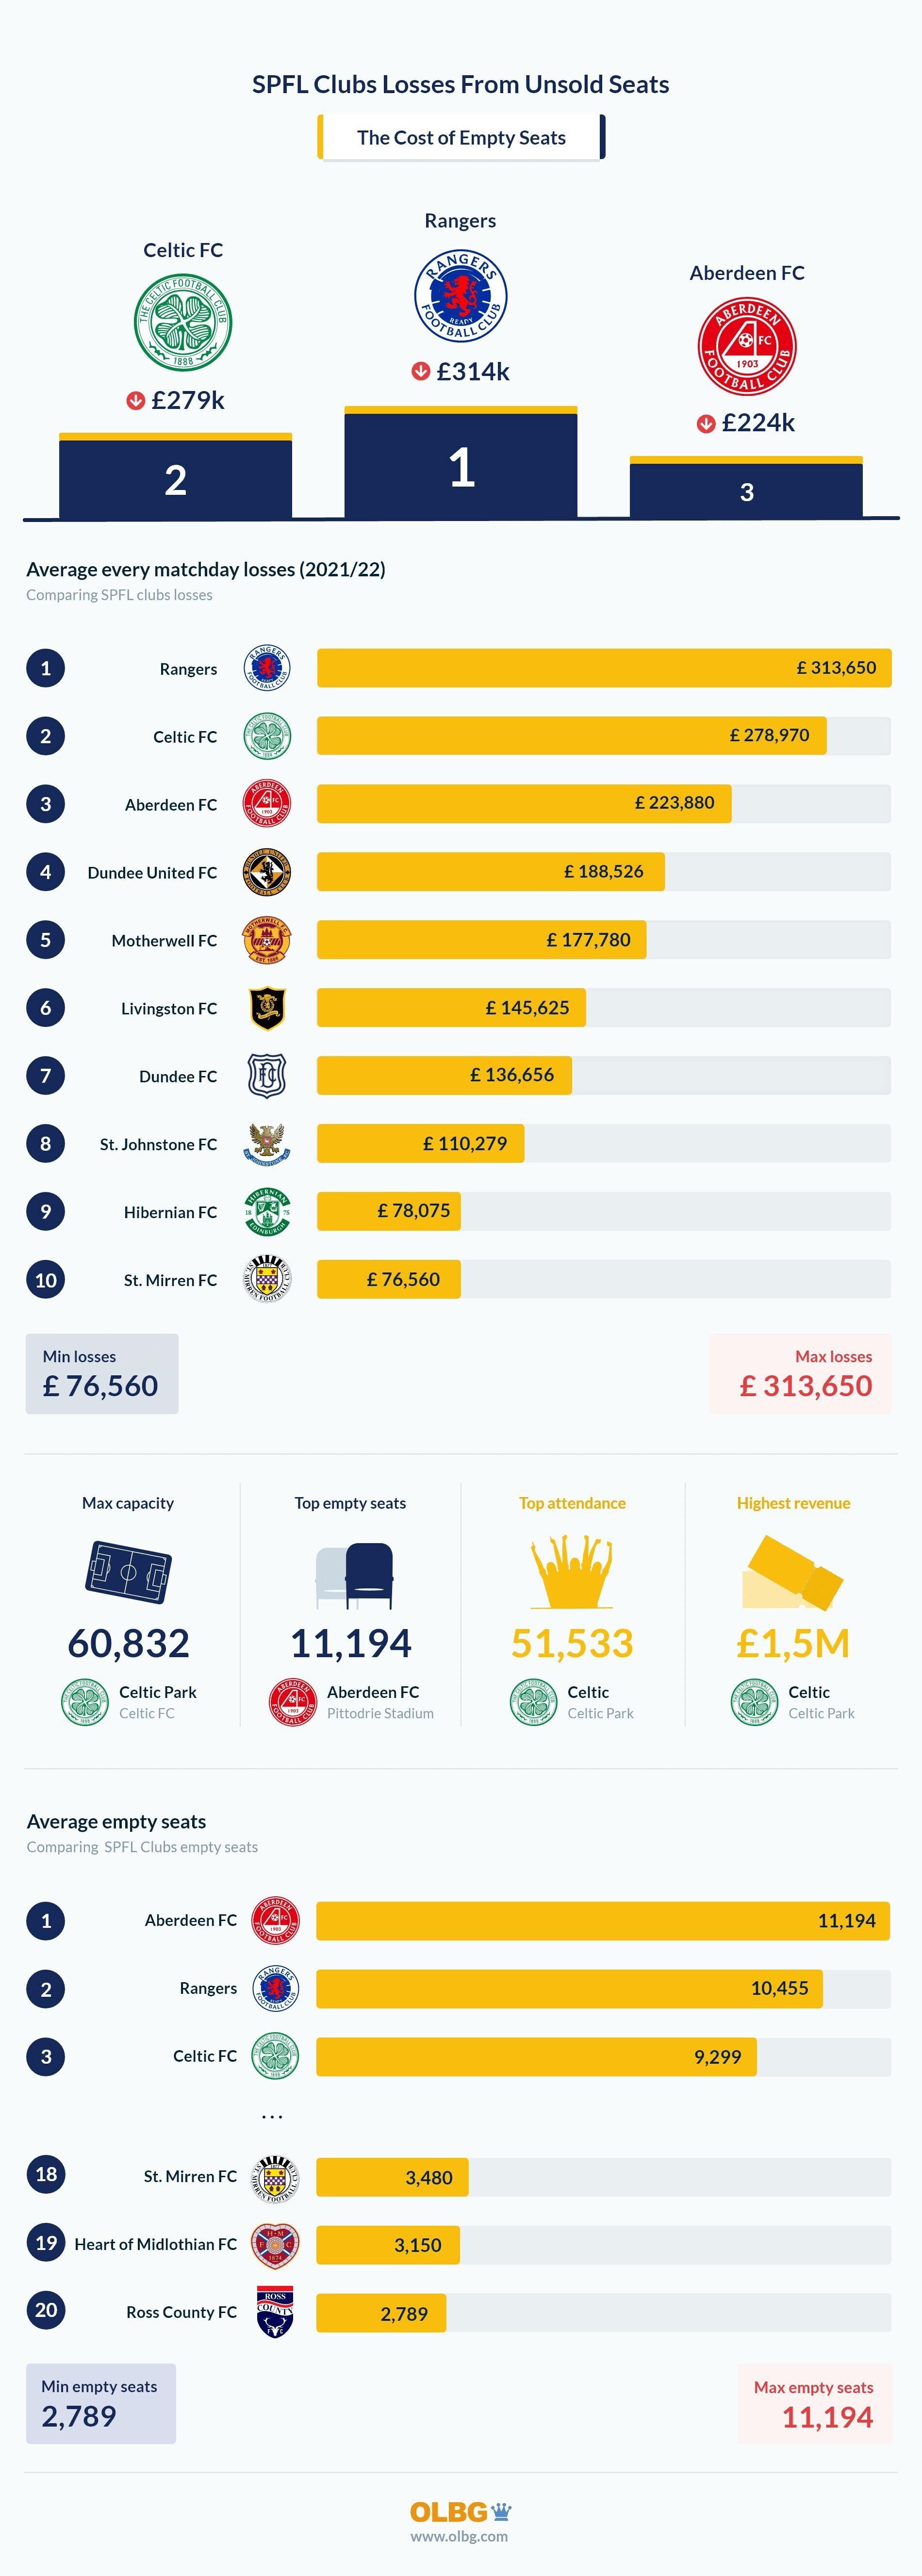 SPFL clubs losses 2021/2022 infographic - update